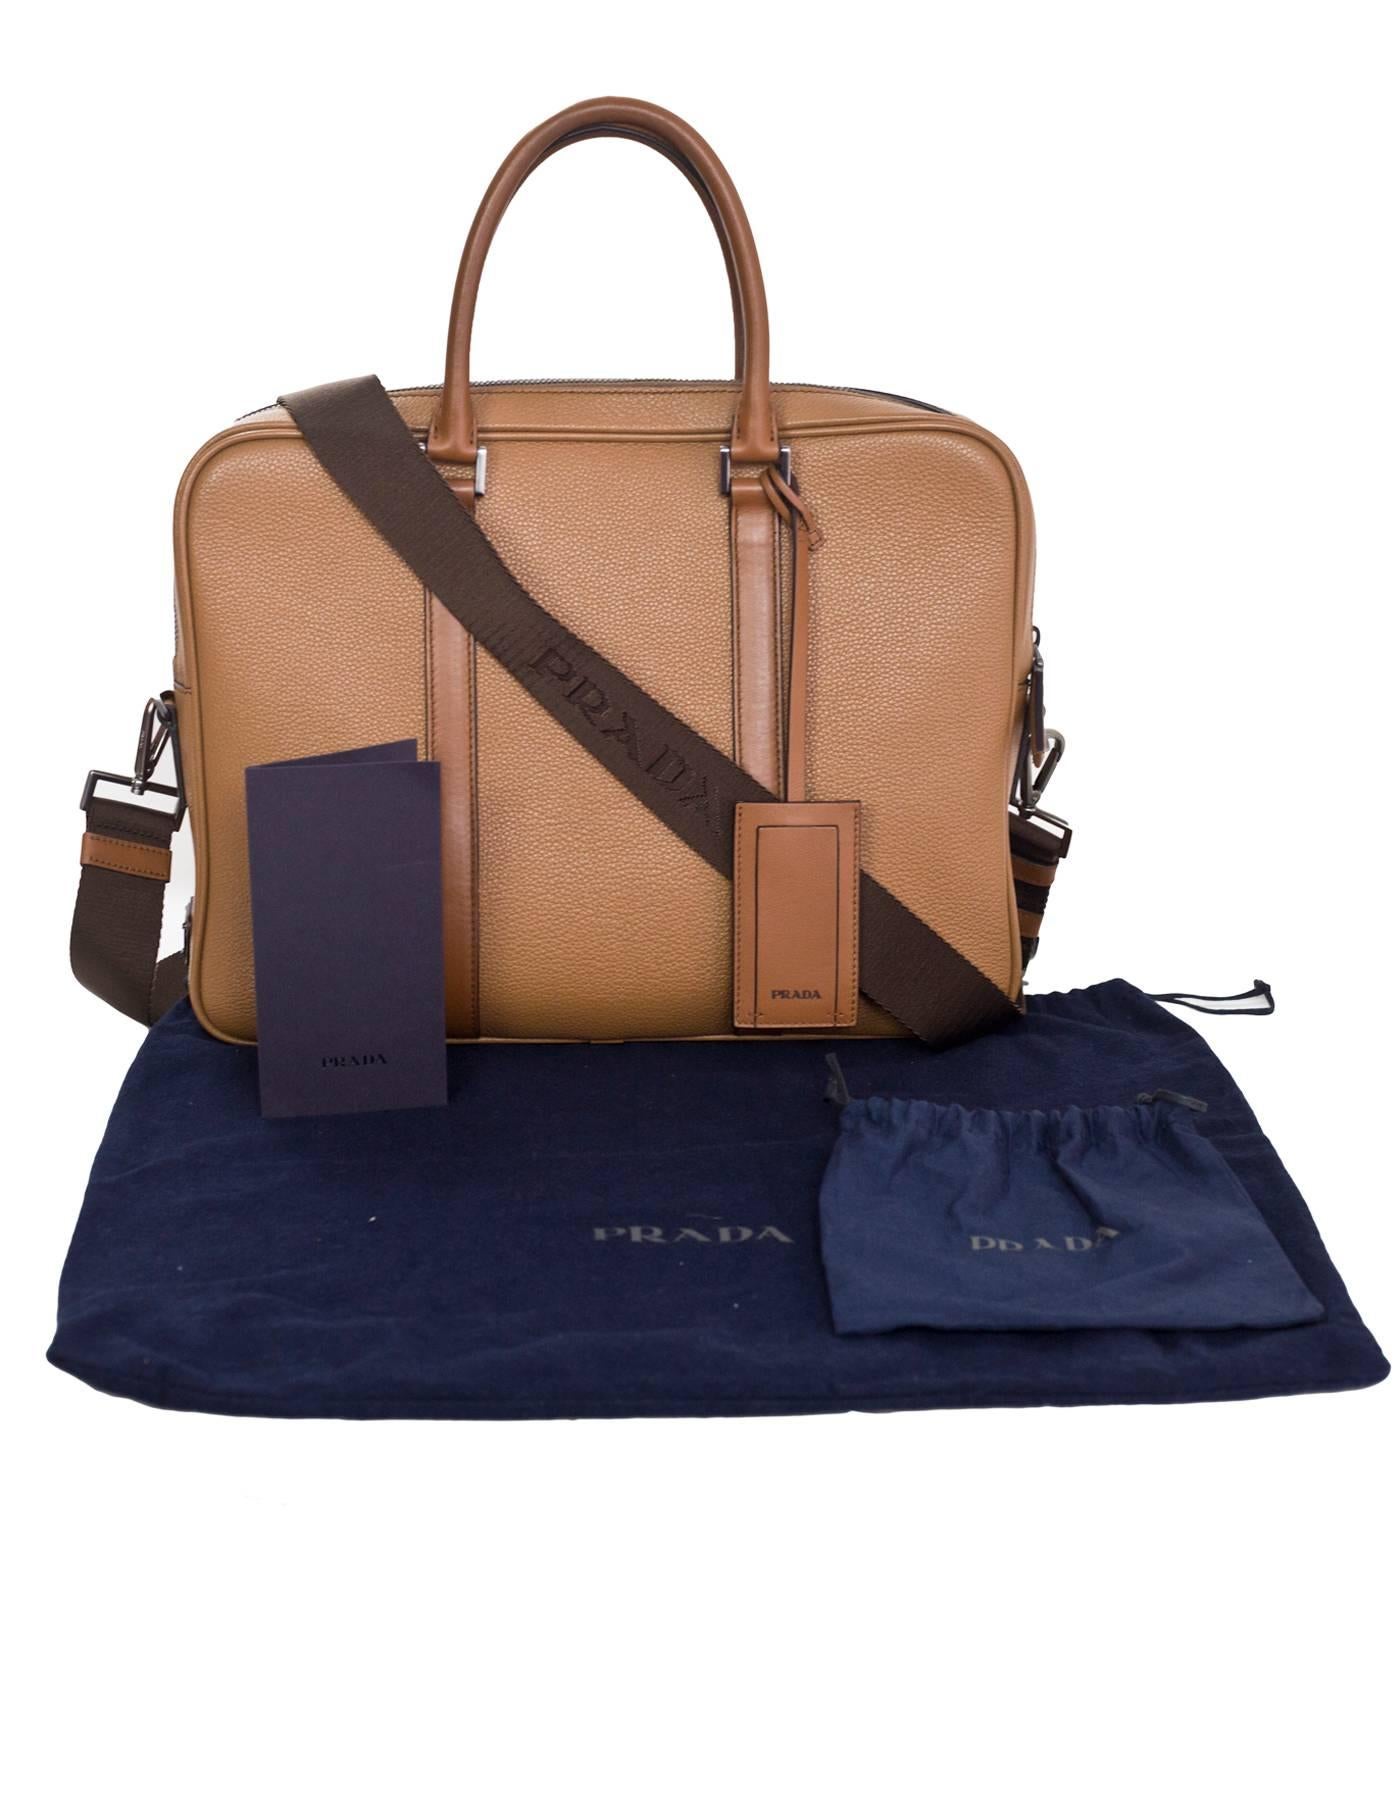 Prada Tan Grained Leather Briefcase/Laptop Bag with Strap rt. $2, 200 2